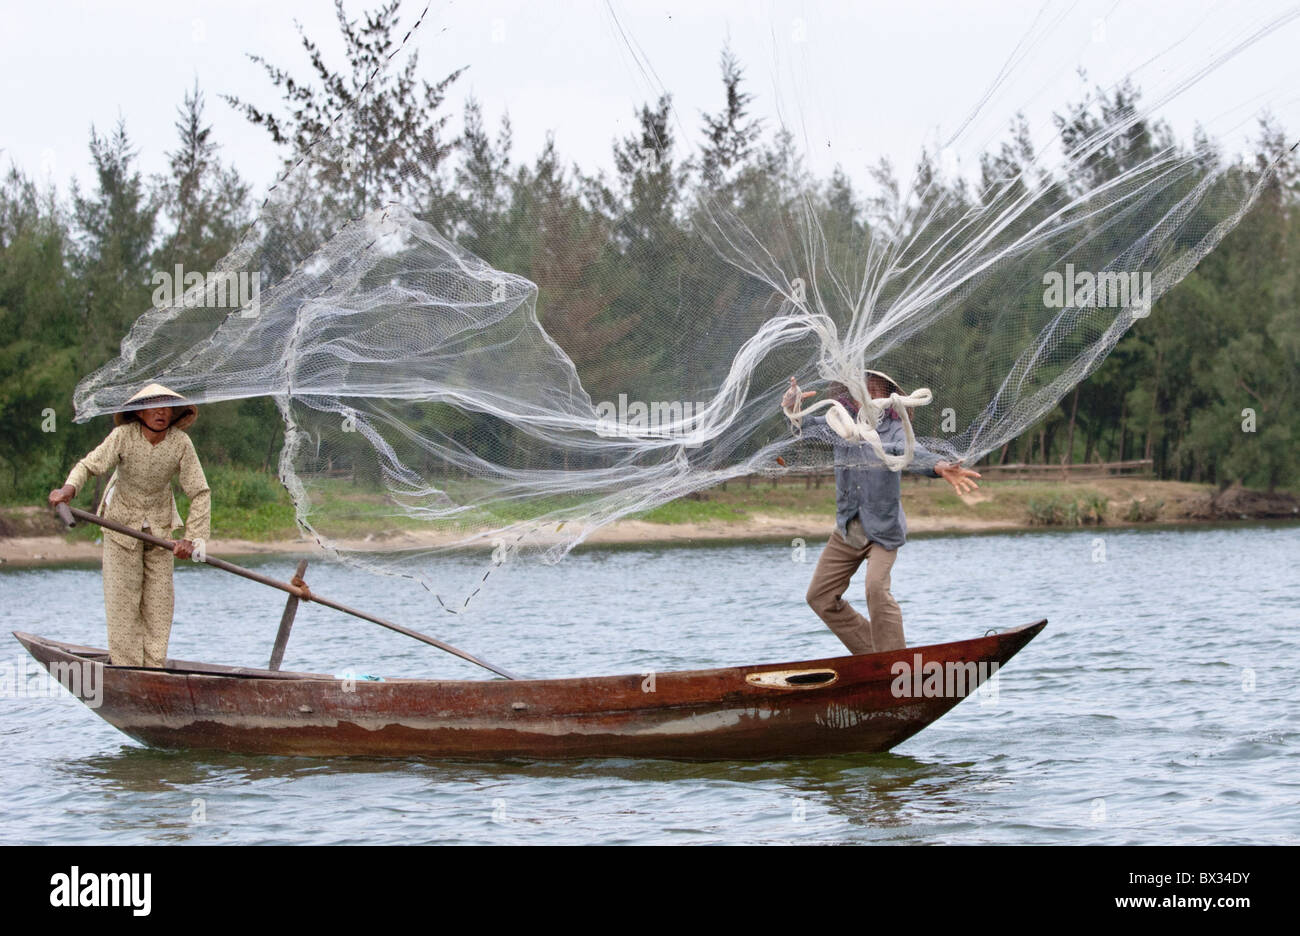 Vietnamese fisherman casting his hand-net from a small boat (rowed